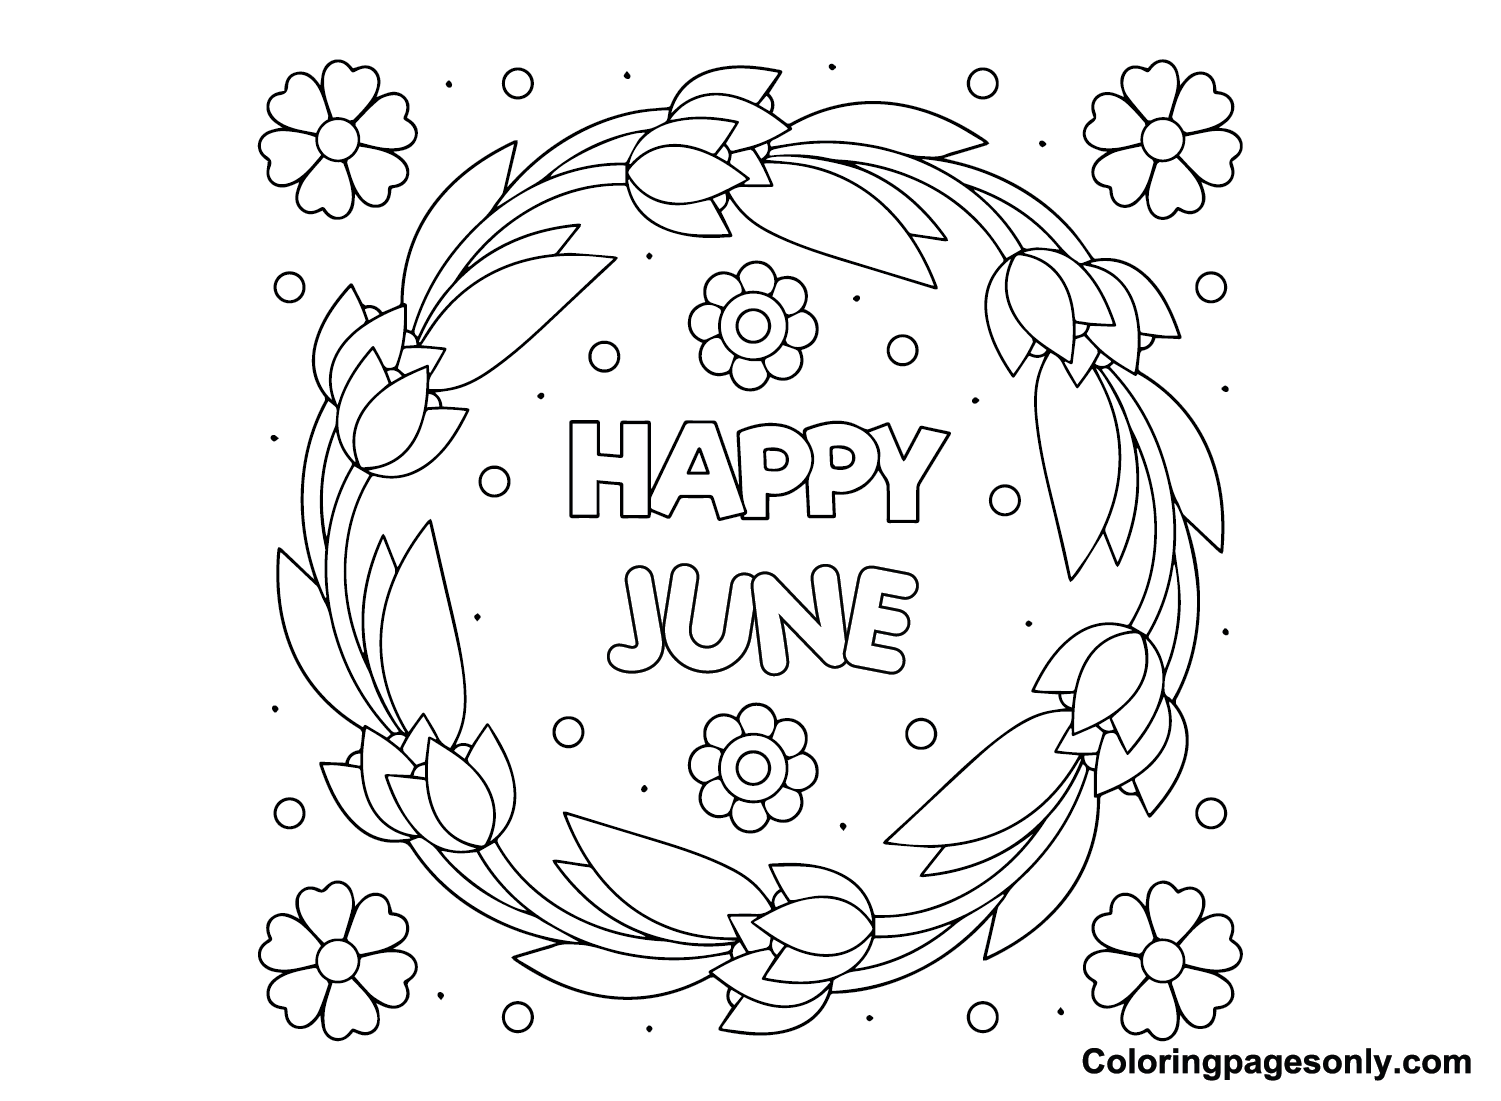 Happy June Coloring Pages